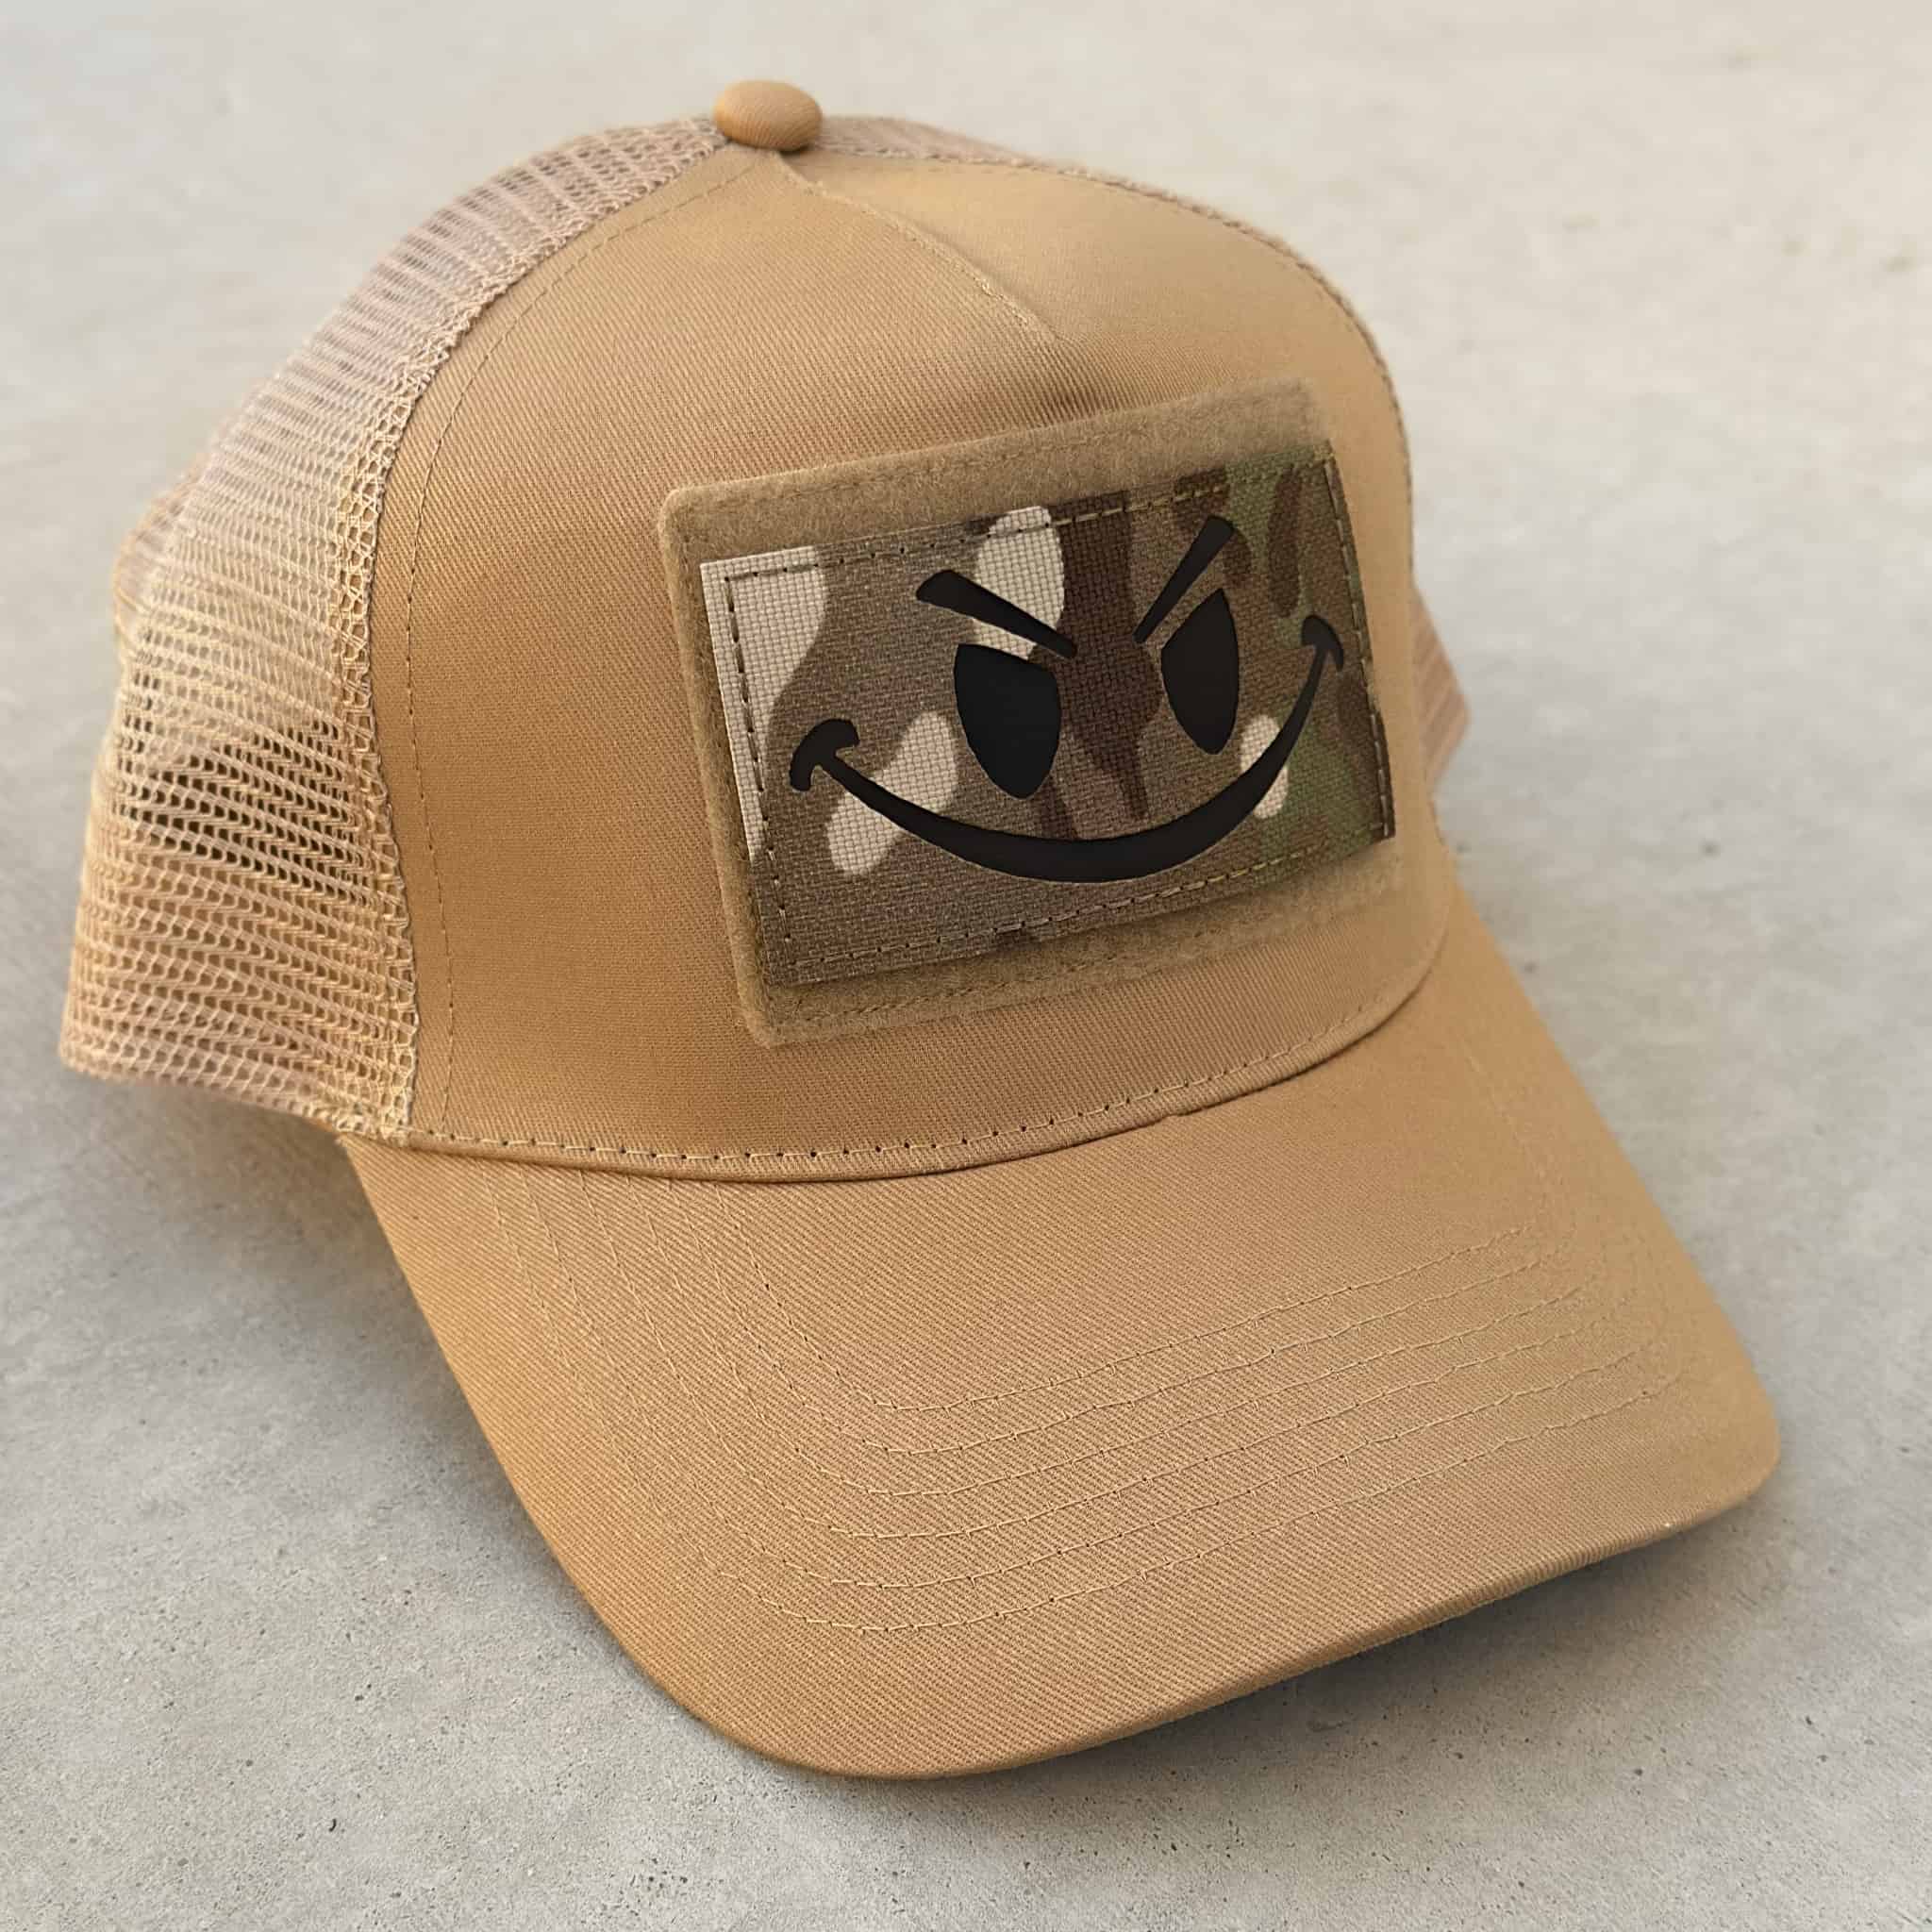 The Smiley cap in desert sand color with camo military style smiley patch